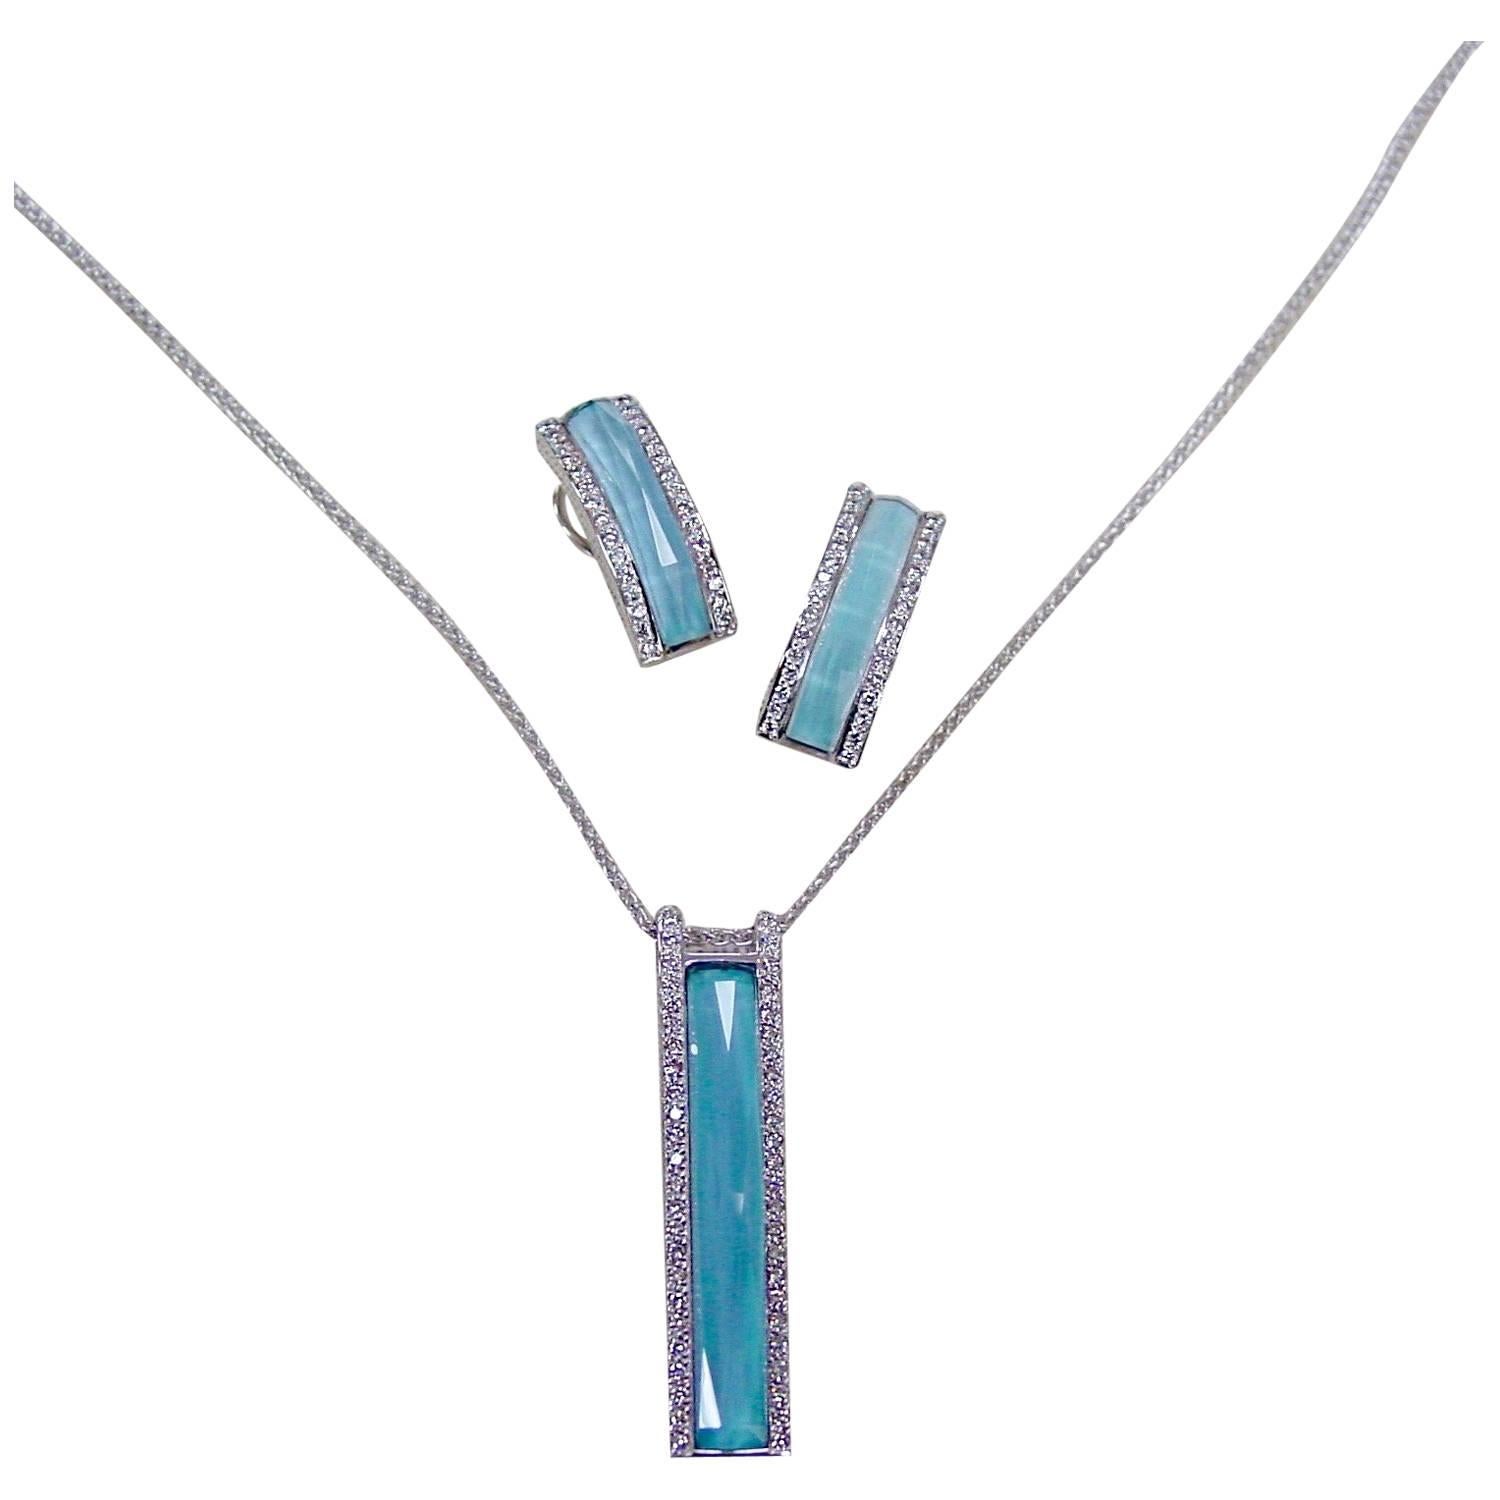 Stephen Webster Turquoise Crystal Haze Necklace and Earrings